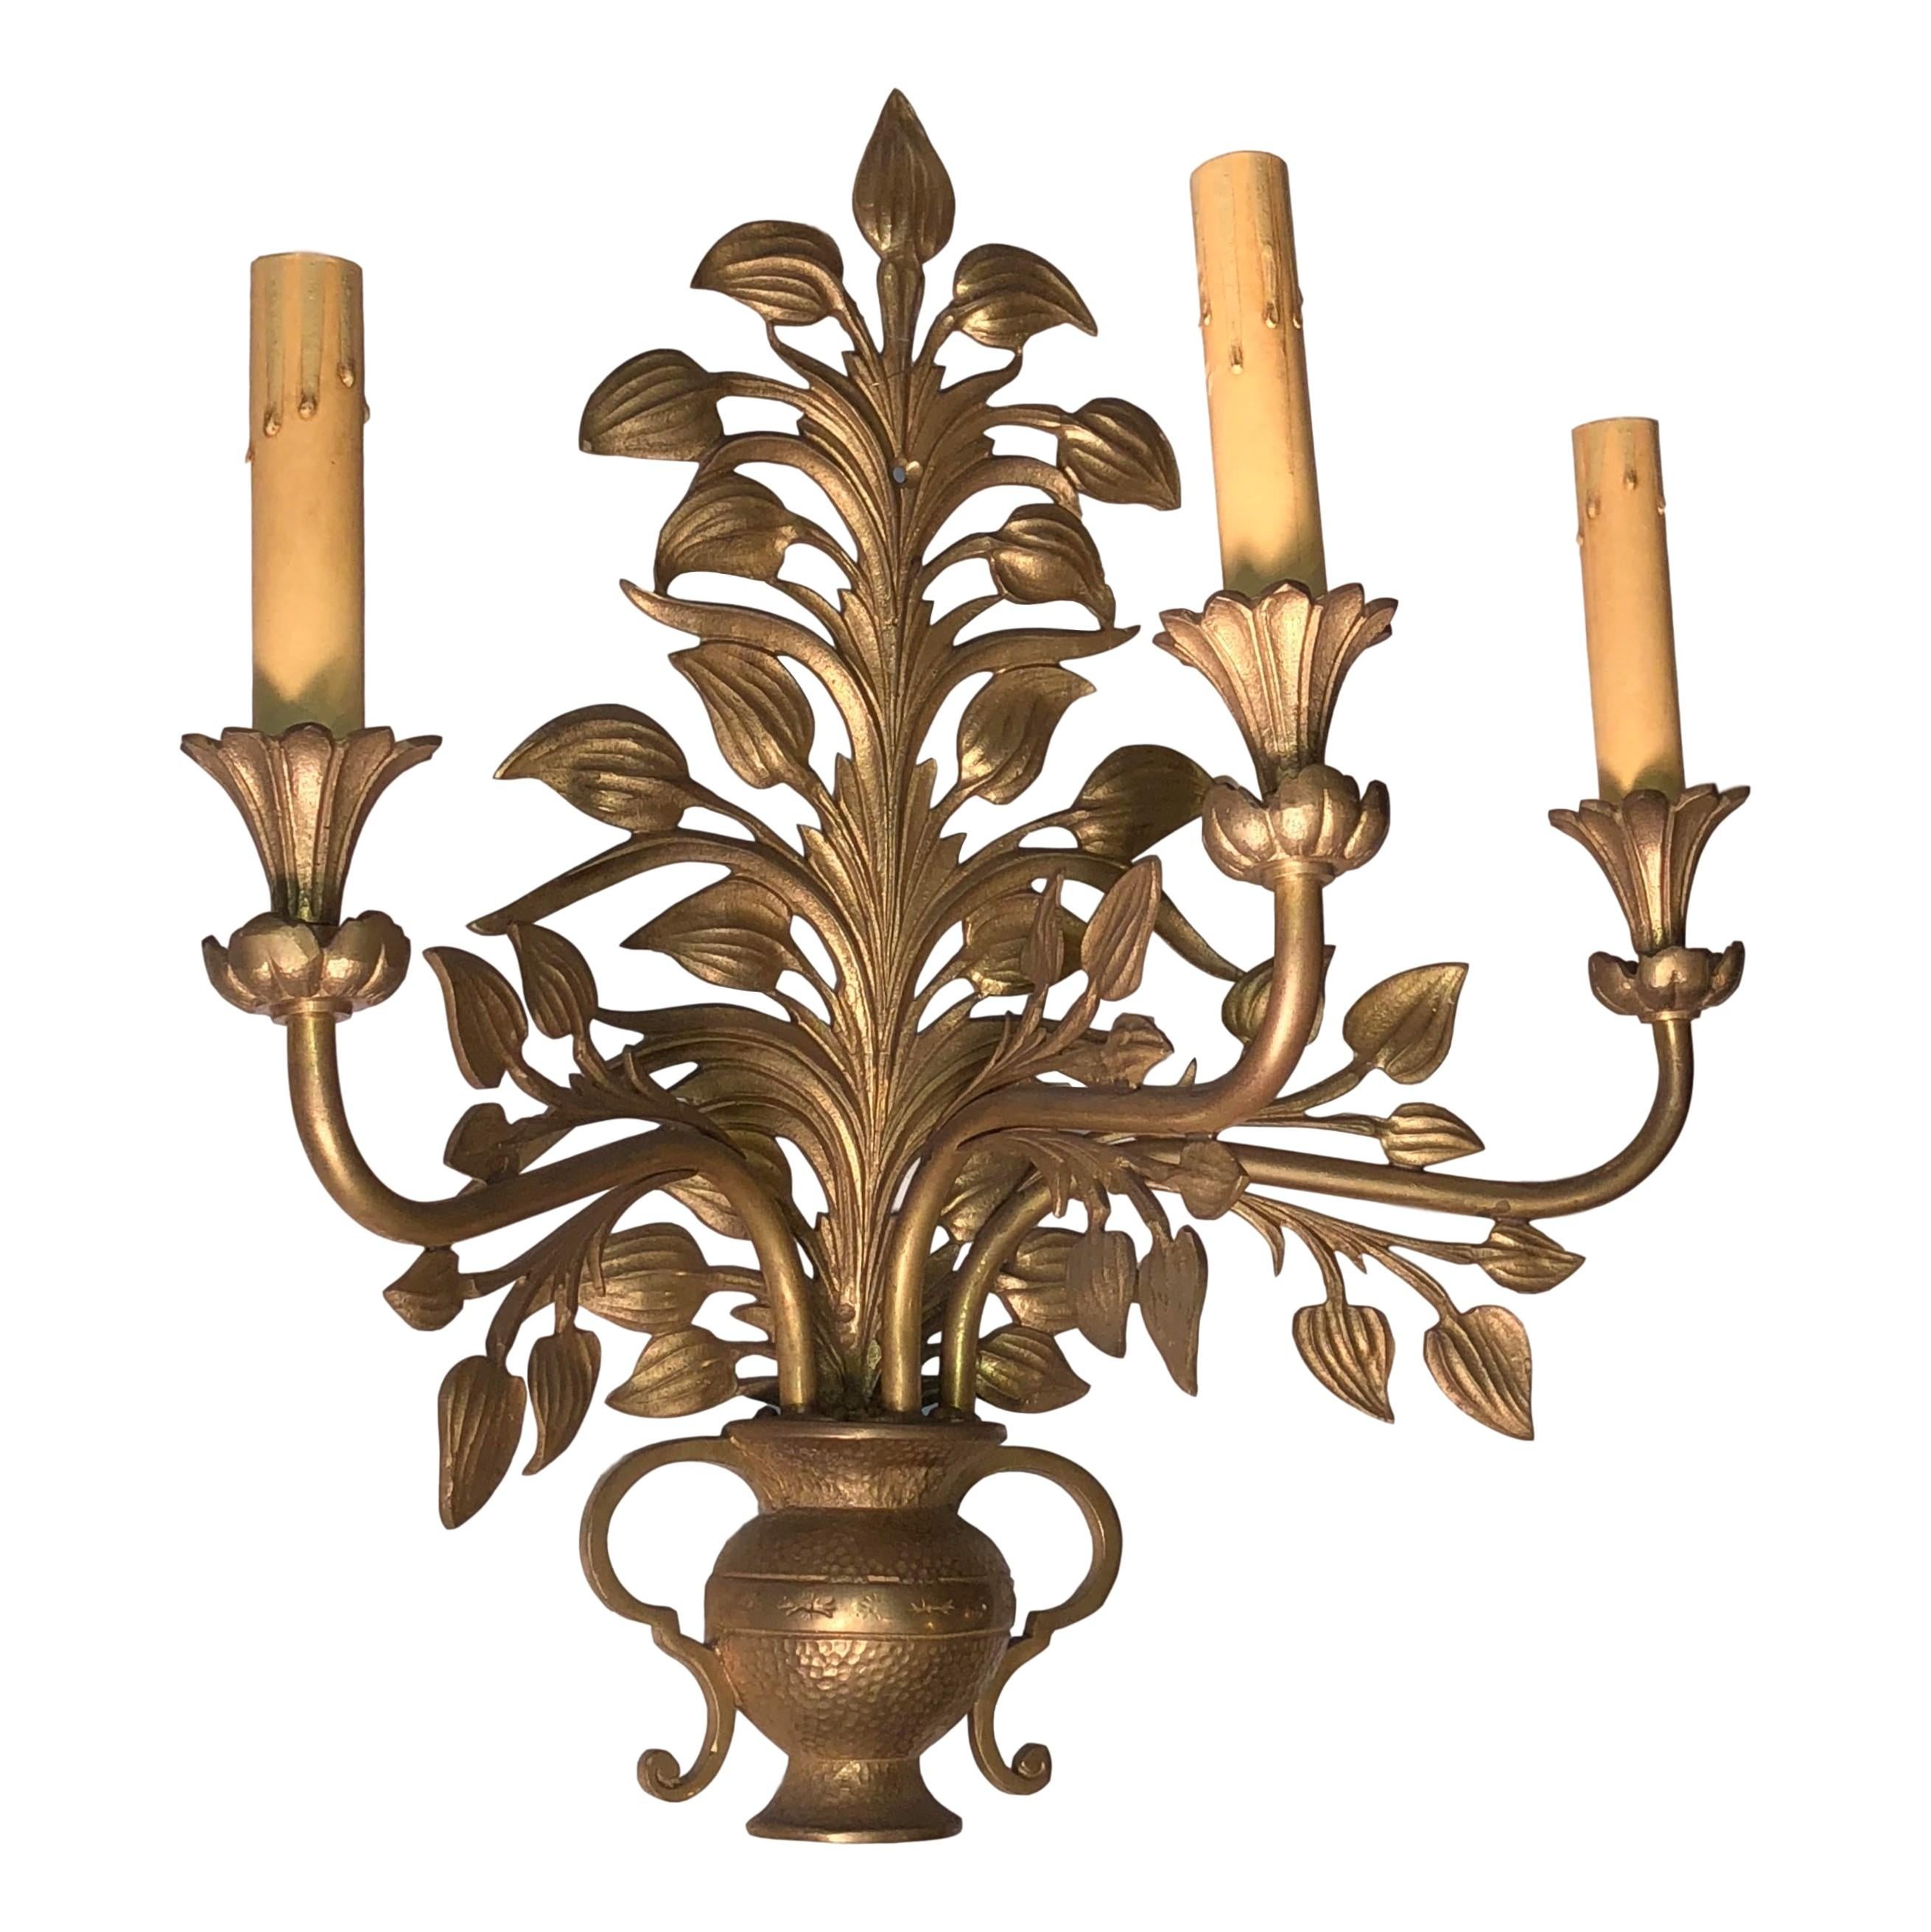 Pair of 1920s French gilt bronze sconces with 3 lights.

Measurements:
Height 17?
Depth 10.5?
Width 16?